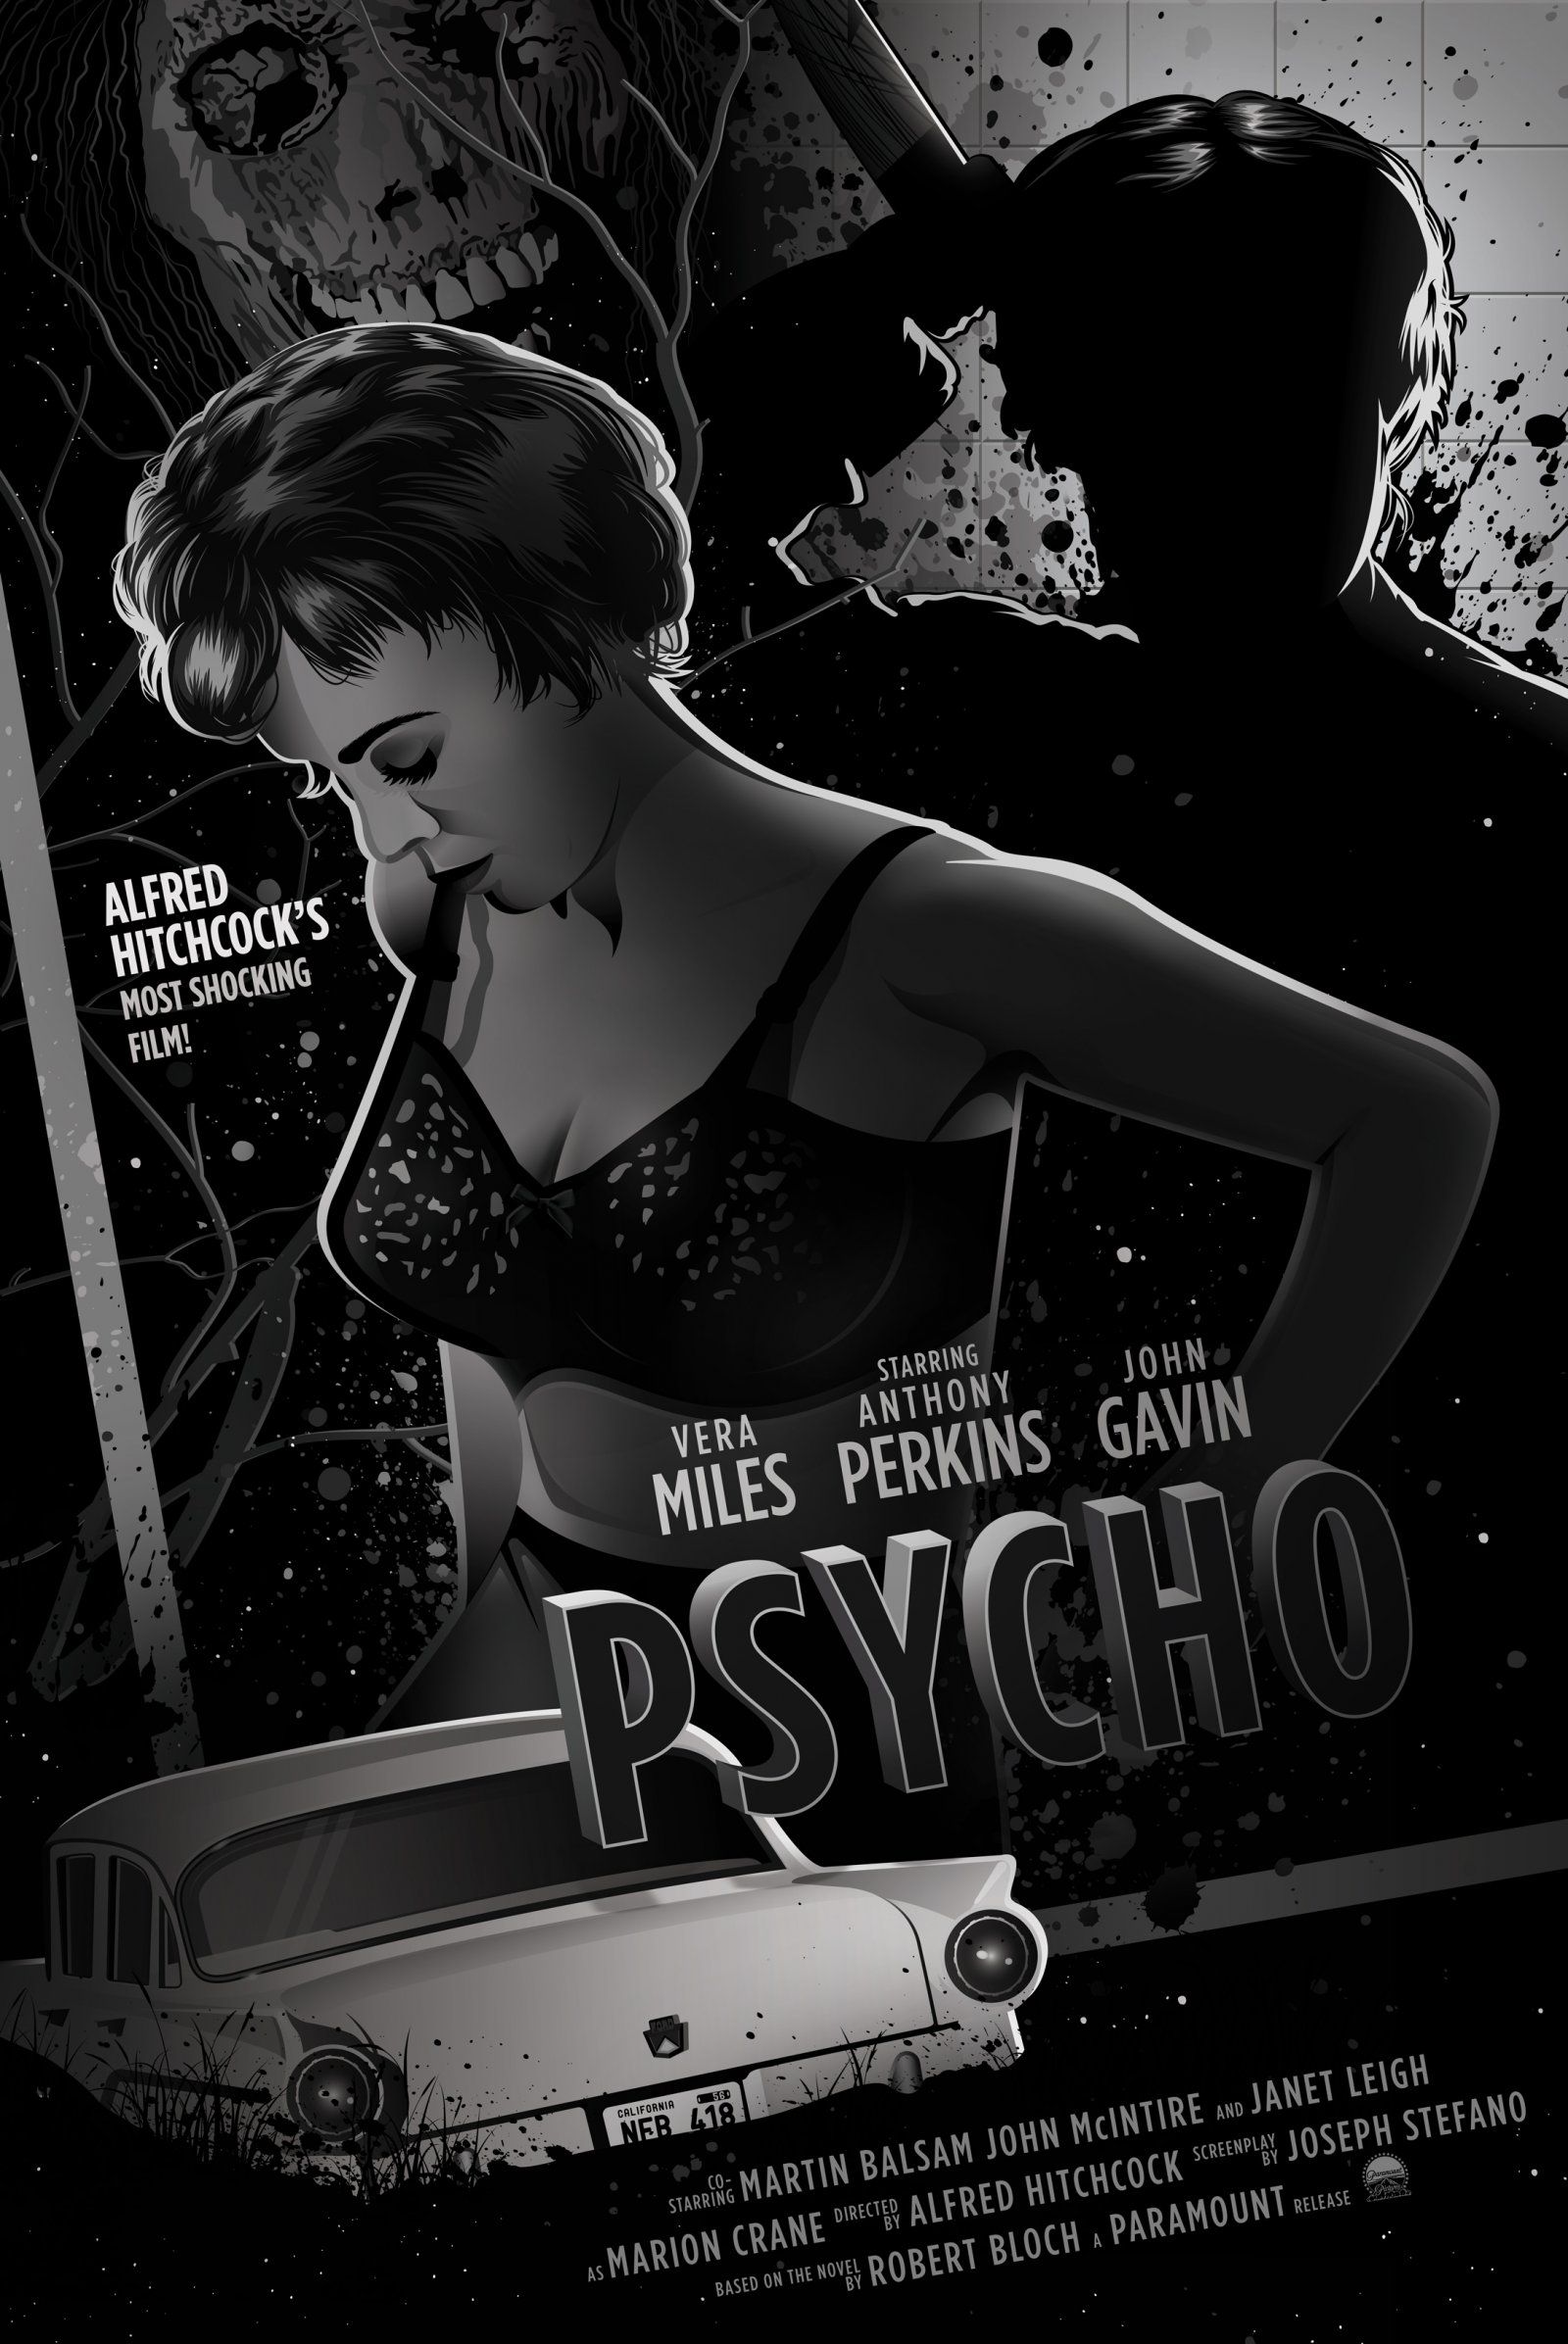 Psycho HD Wallpaper From Gallsource With Image